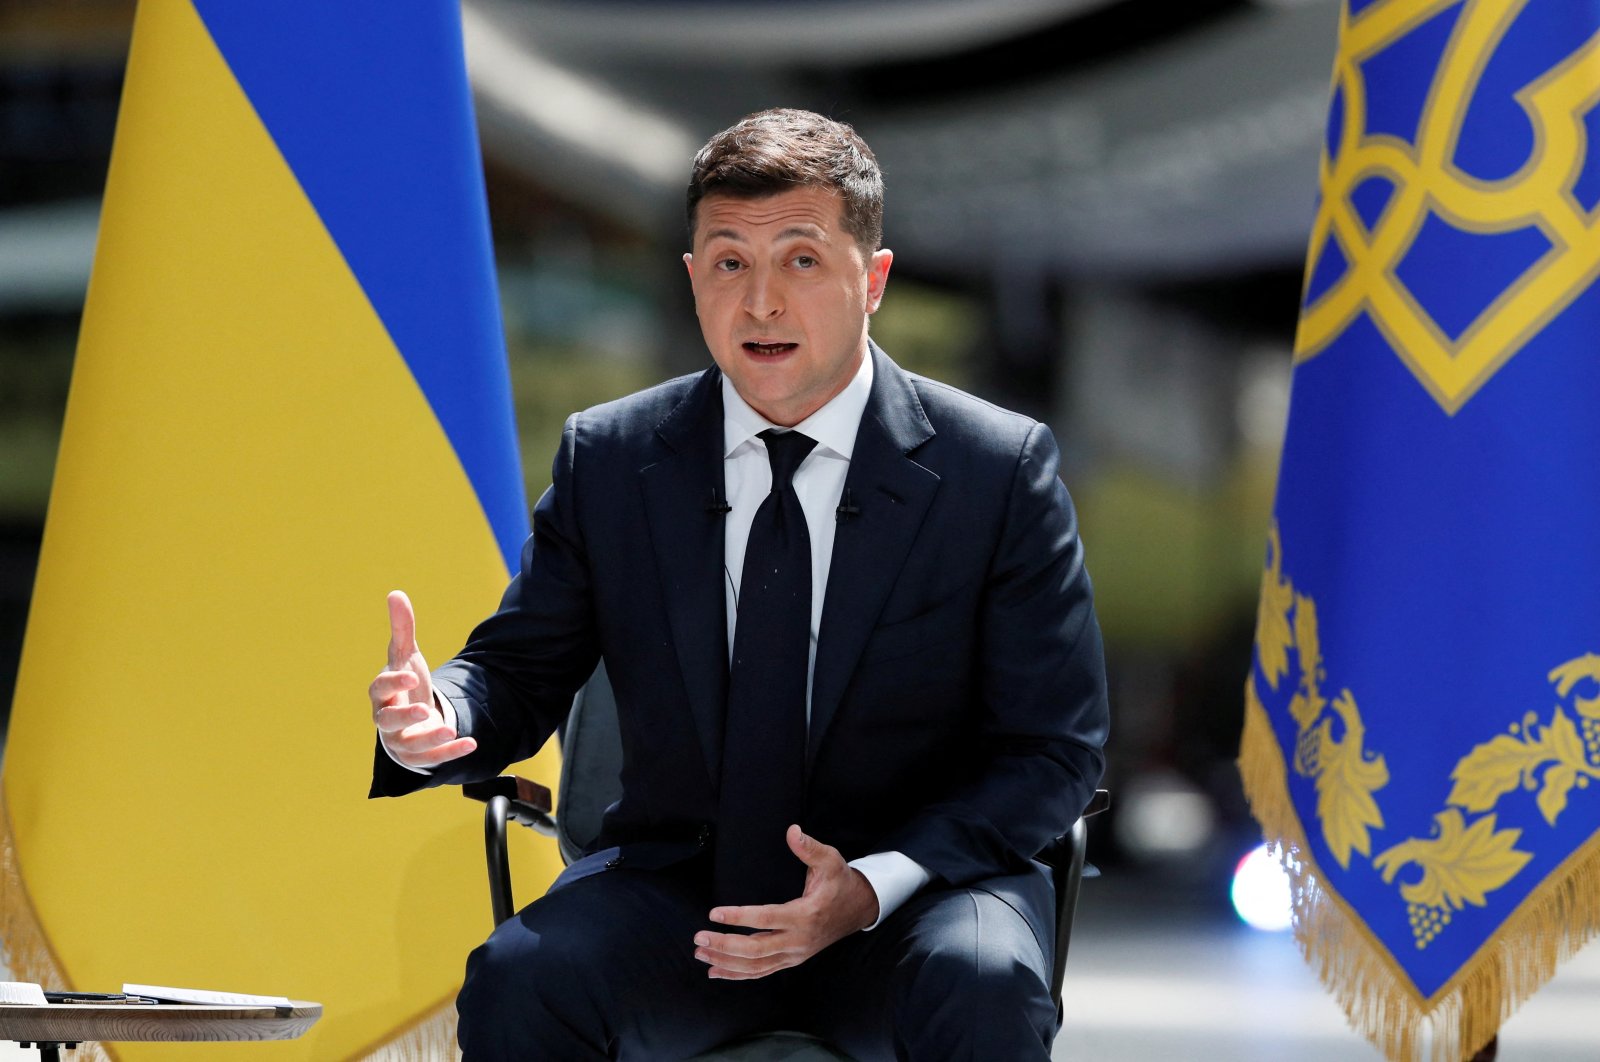 Ukraine&#039;s President Volodymyr Zelenskyy speaks during his annual news conference at the Antonov aircraft plant in Kyiv, Ukraine, May 20, 2021. (Reuters Photo)